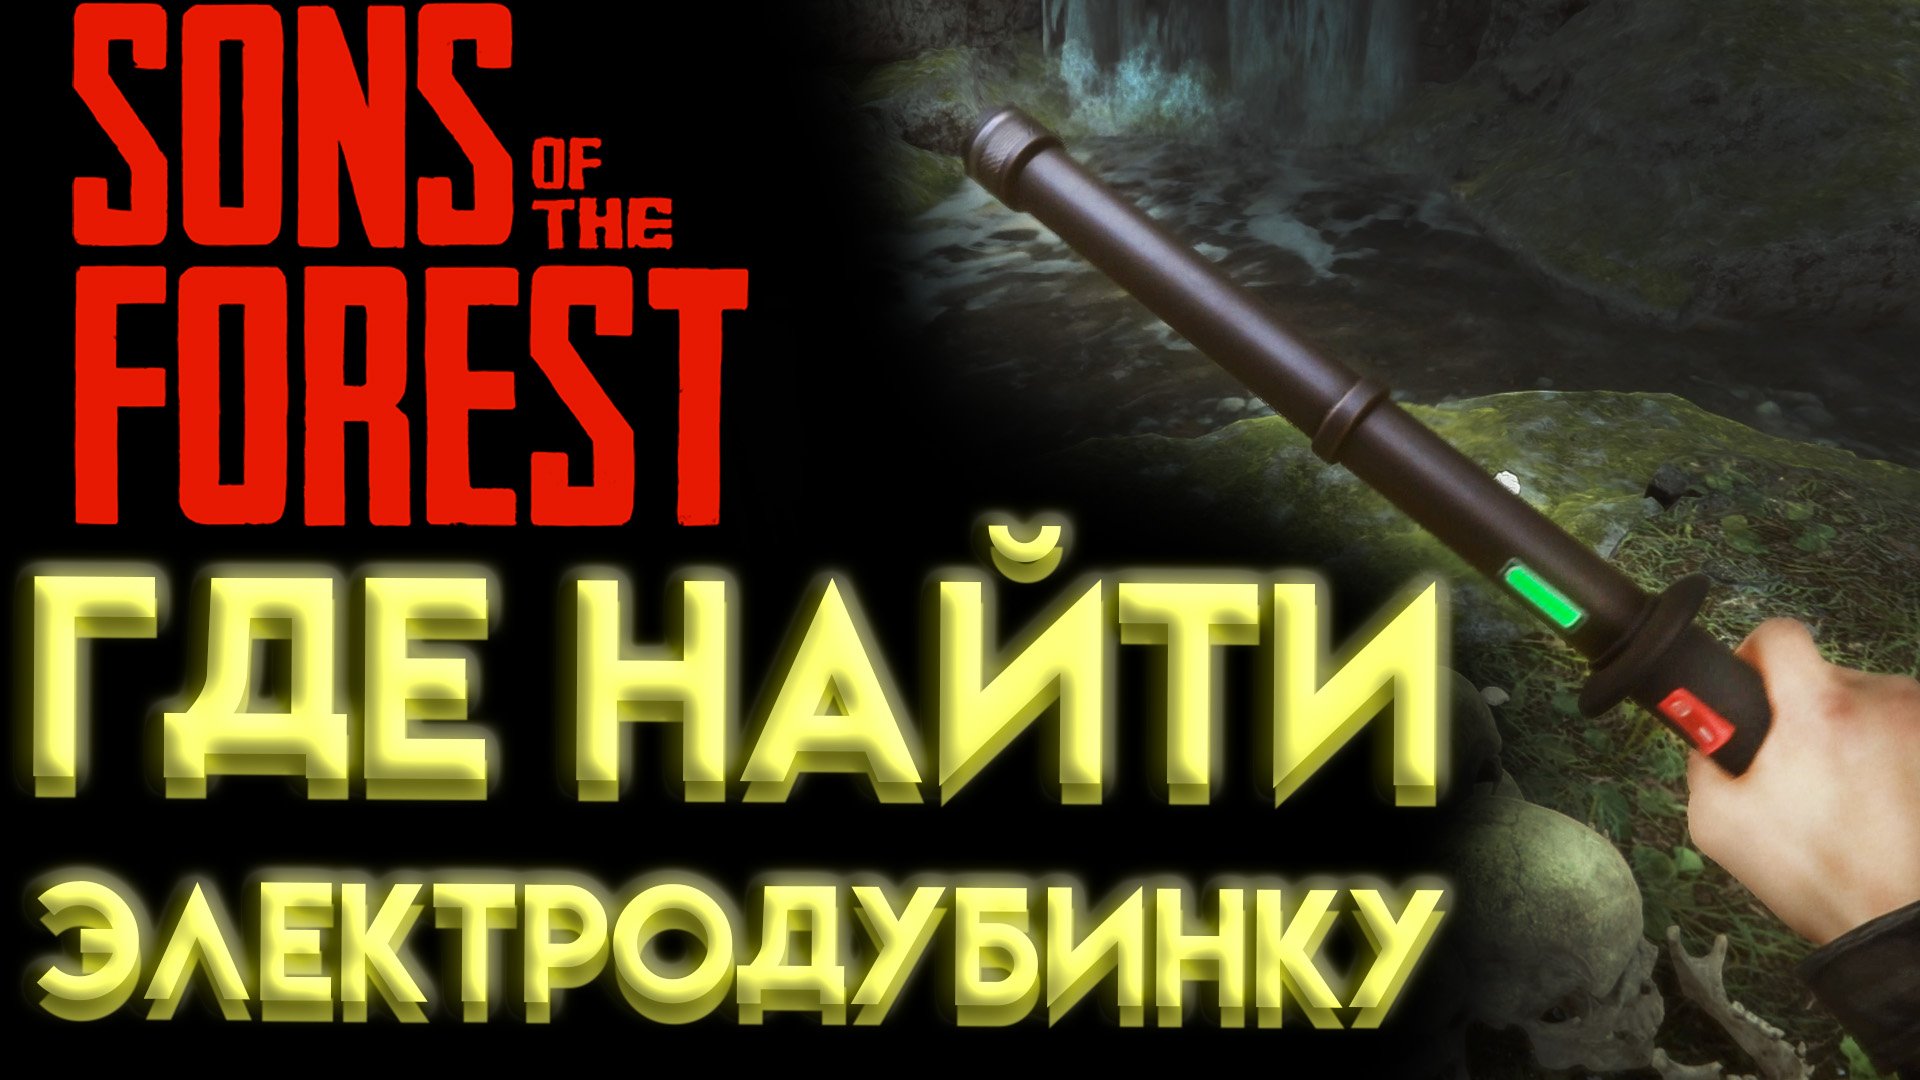 SONS OF THE FOREST ЭЛЕКТРОДУБИНКА ГДЕ НАЙТИ